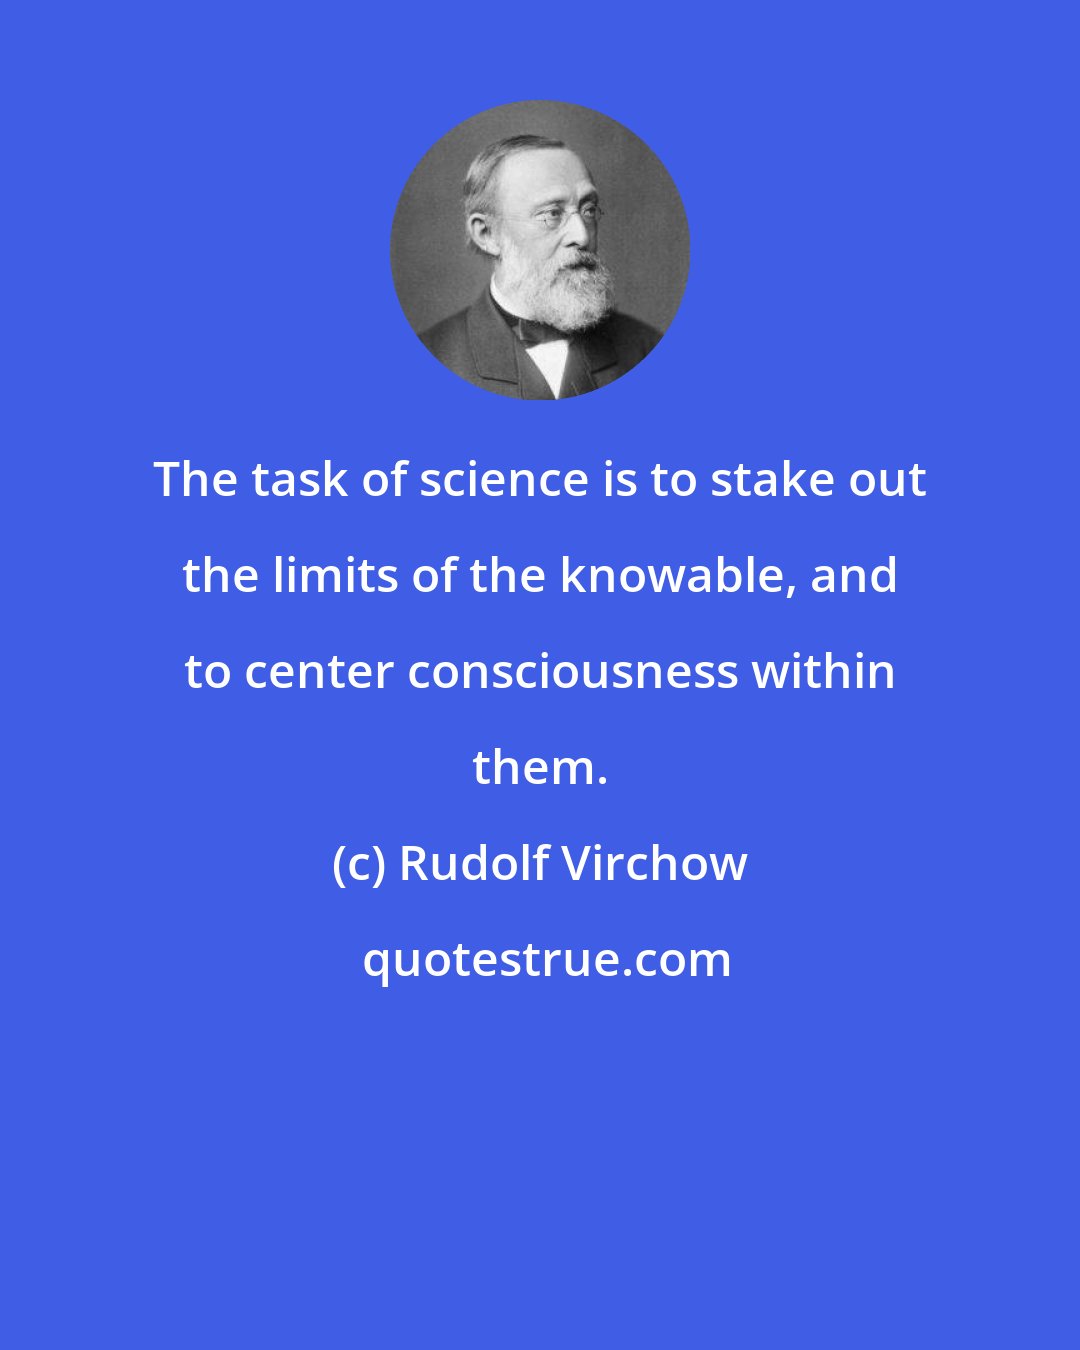 Rudolf Virchow: The task of science is to stake out the limits of the knowable, and to center consciousness within them.